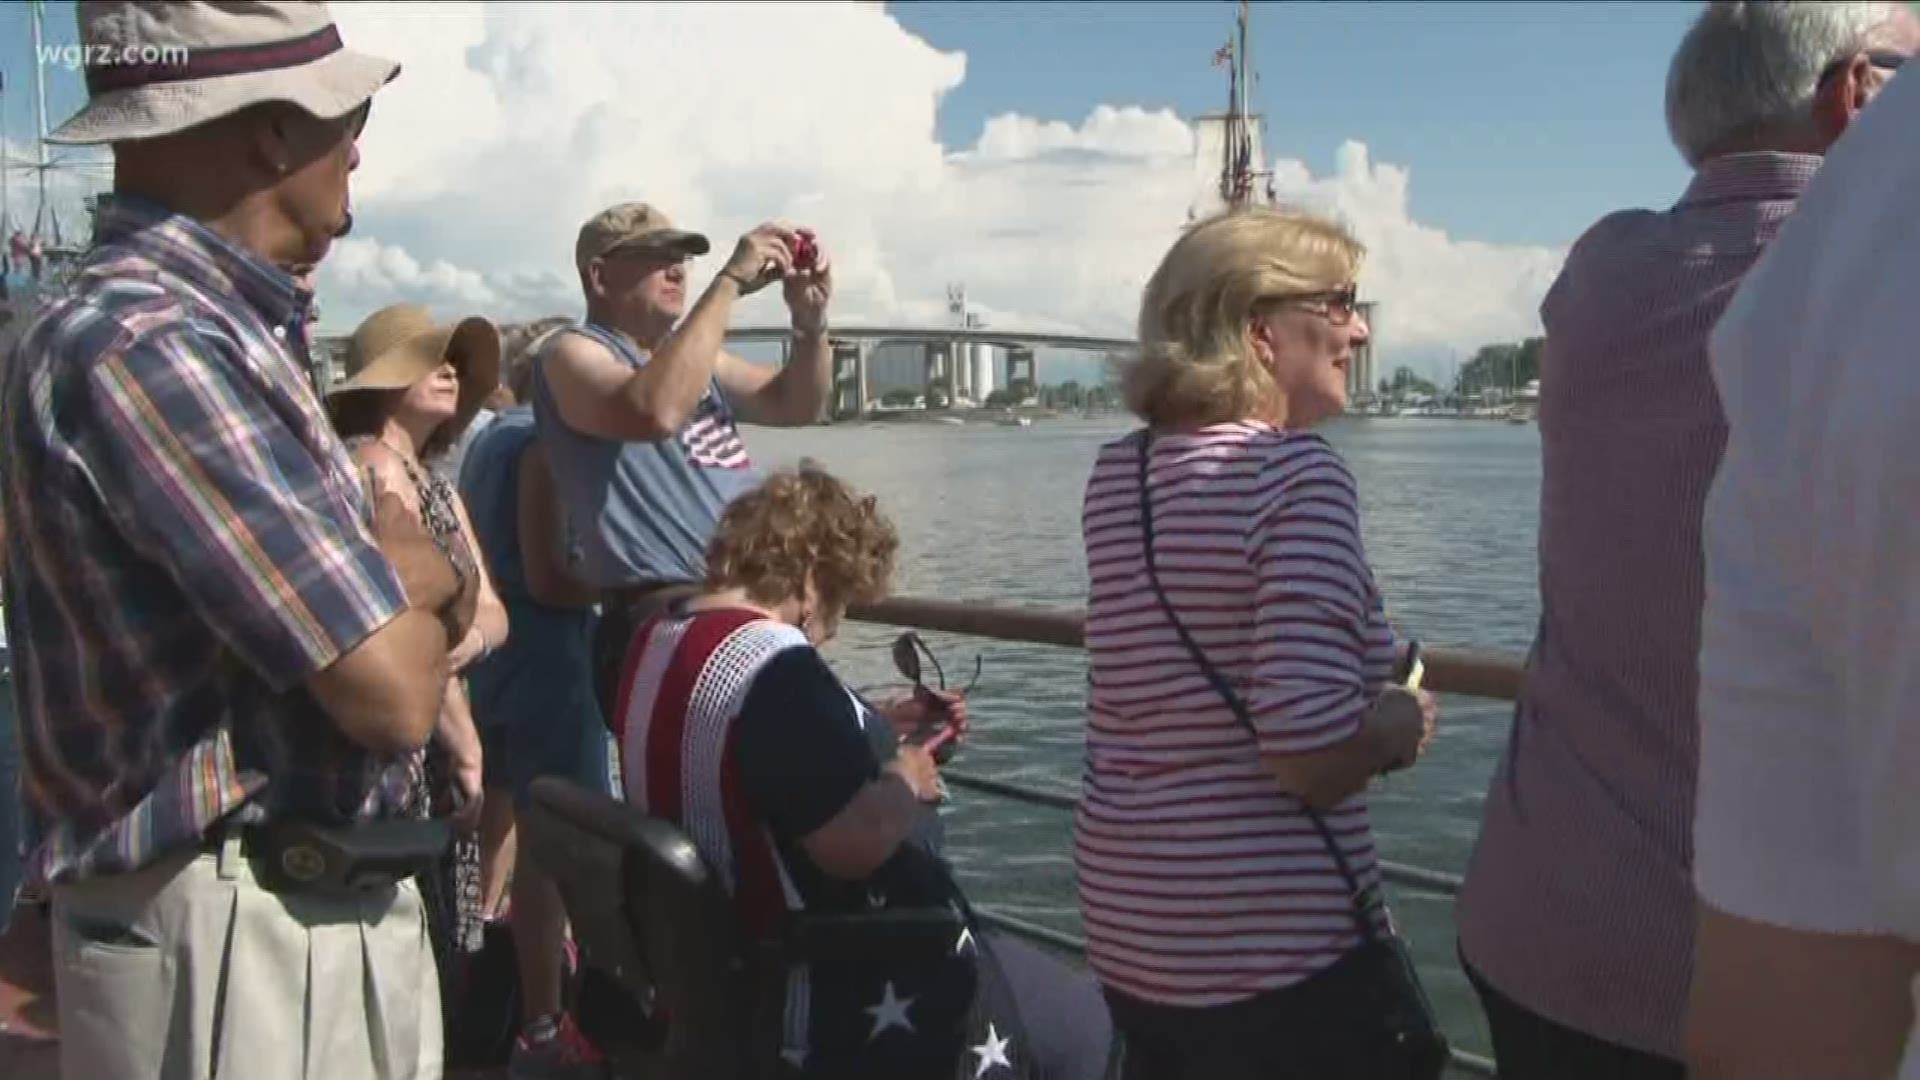 12 Tall Ships at Canalside are bringing a lot of exposure - and more importantly - a lot of money to Western New York.